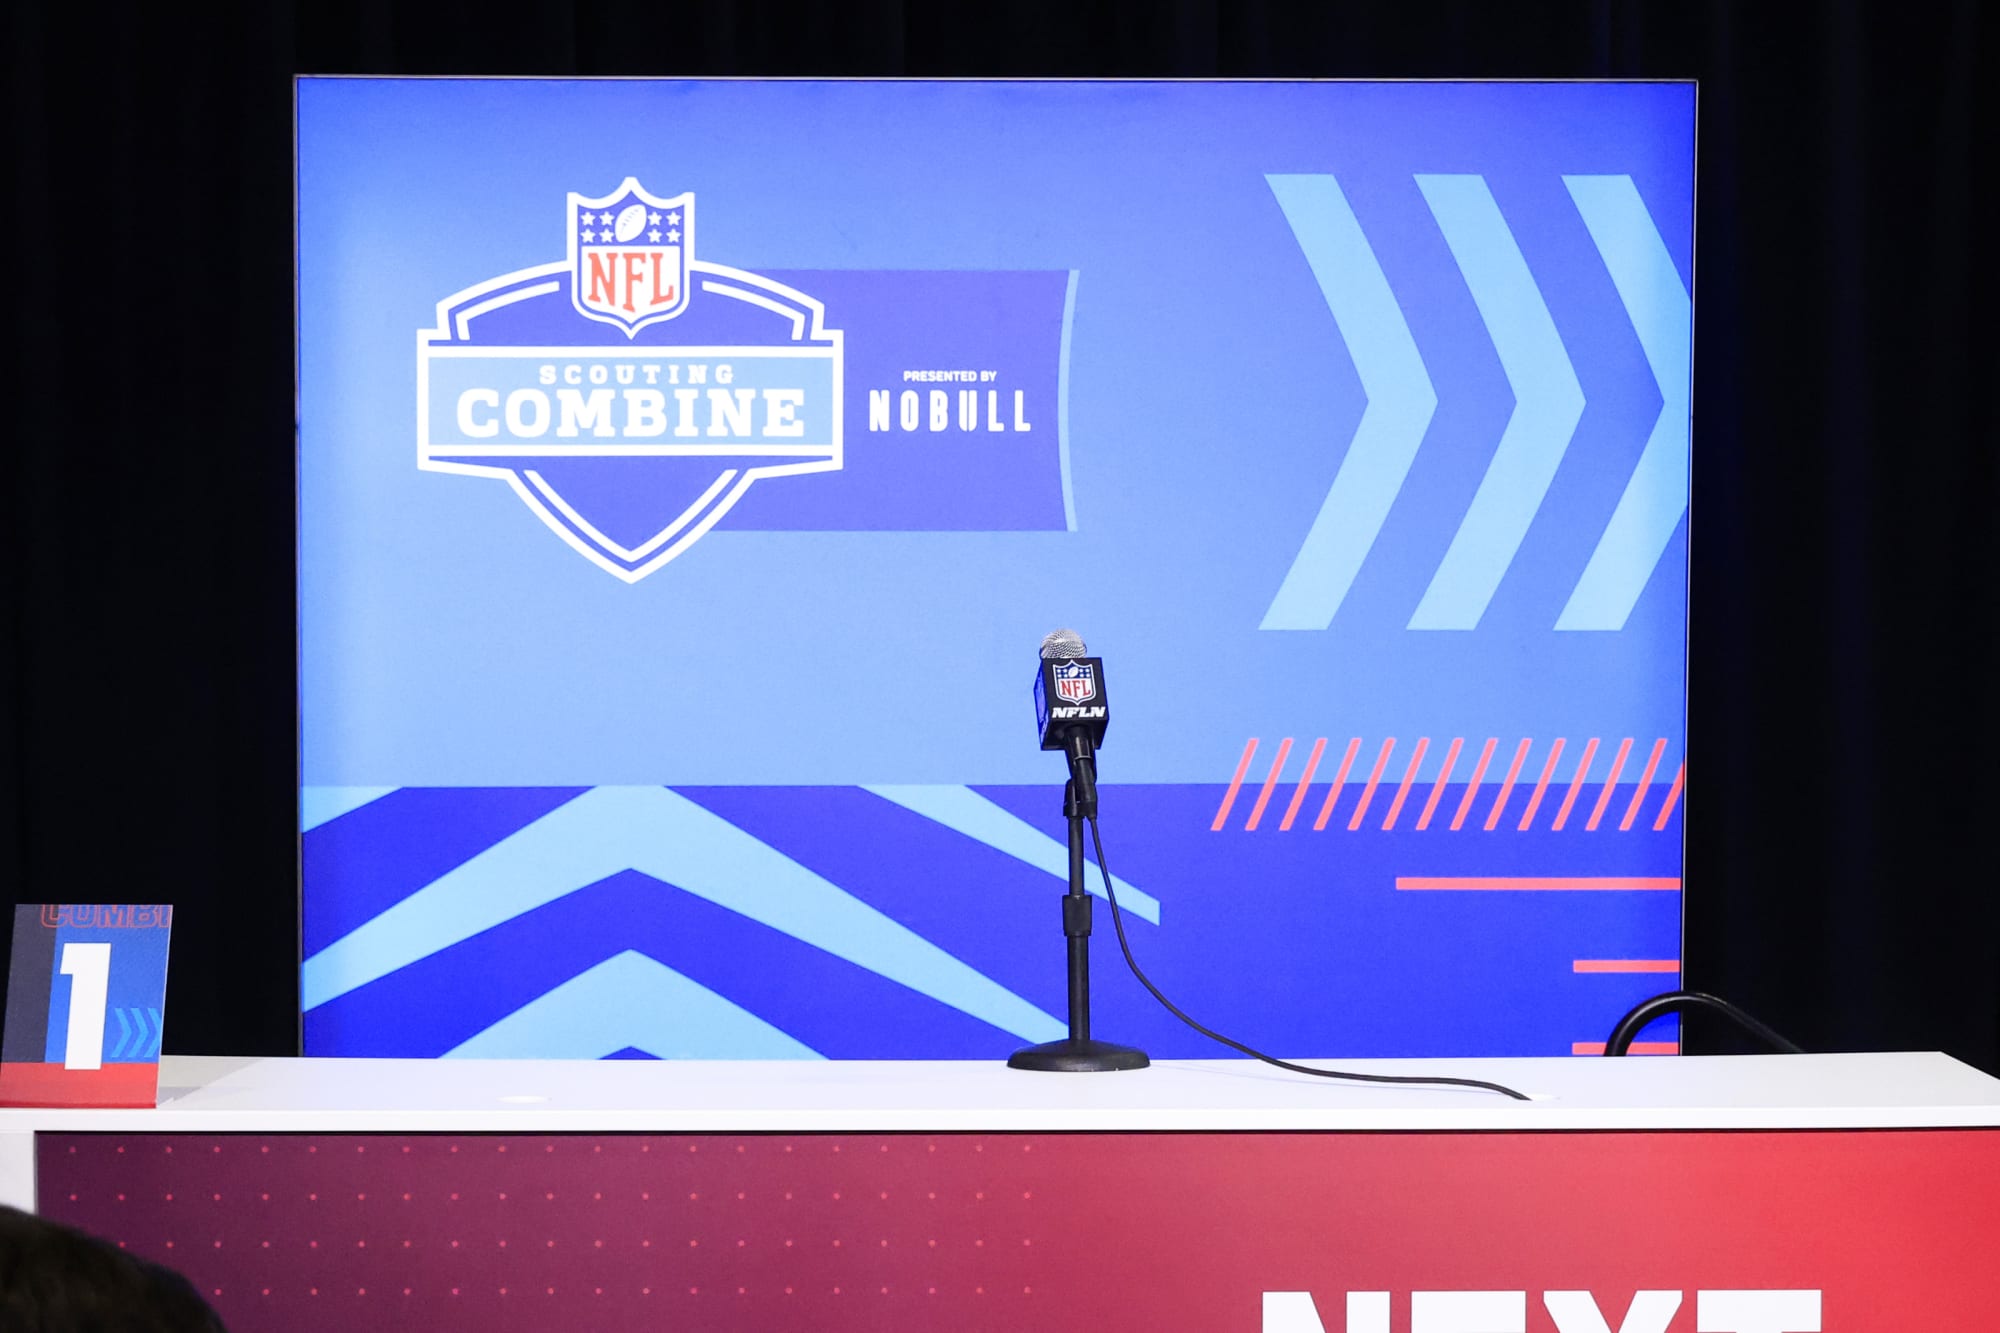 Post-Scouting Combine full two-round NFL Mock Draft